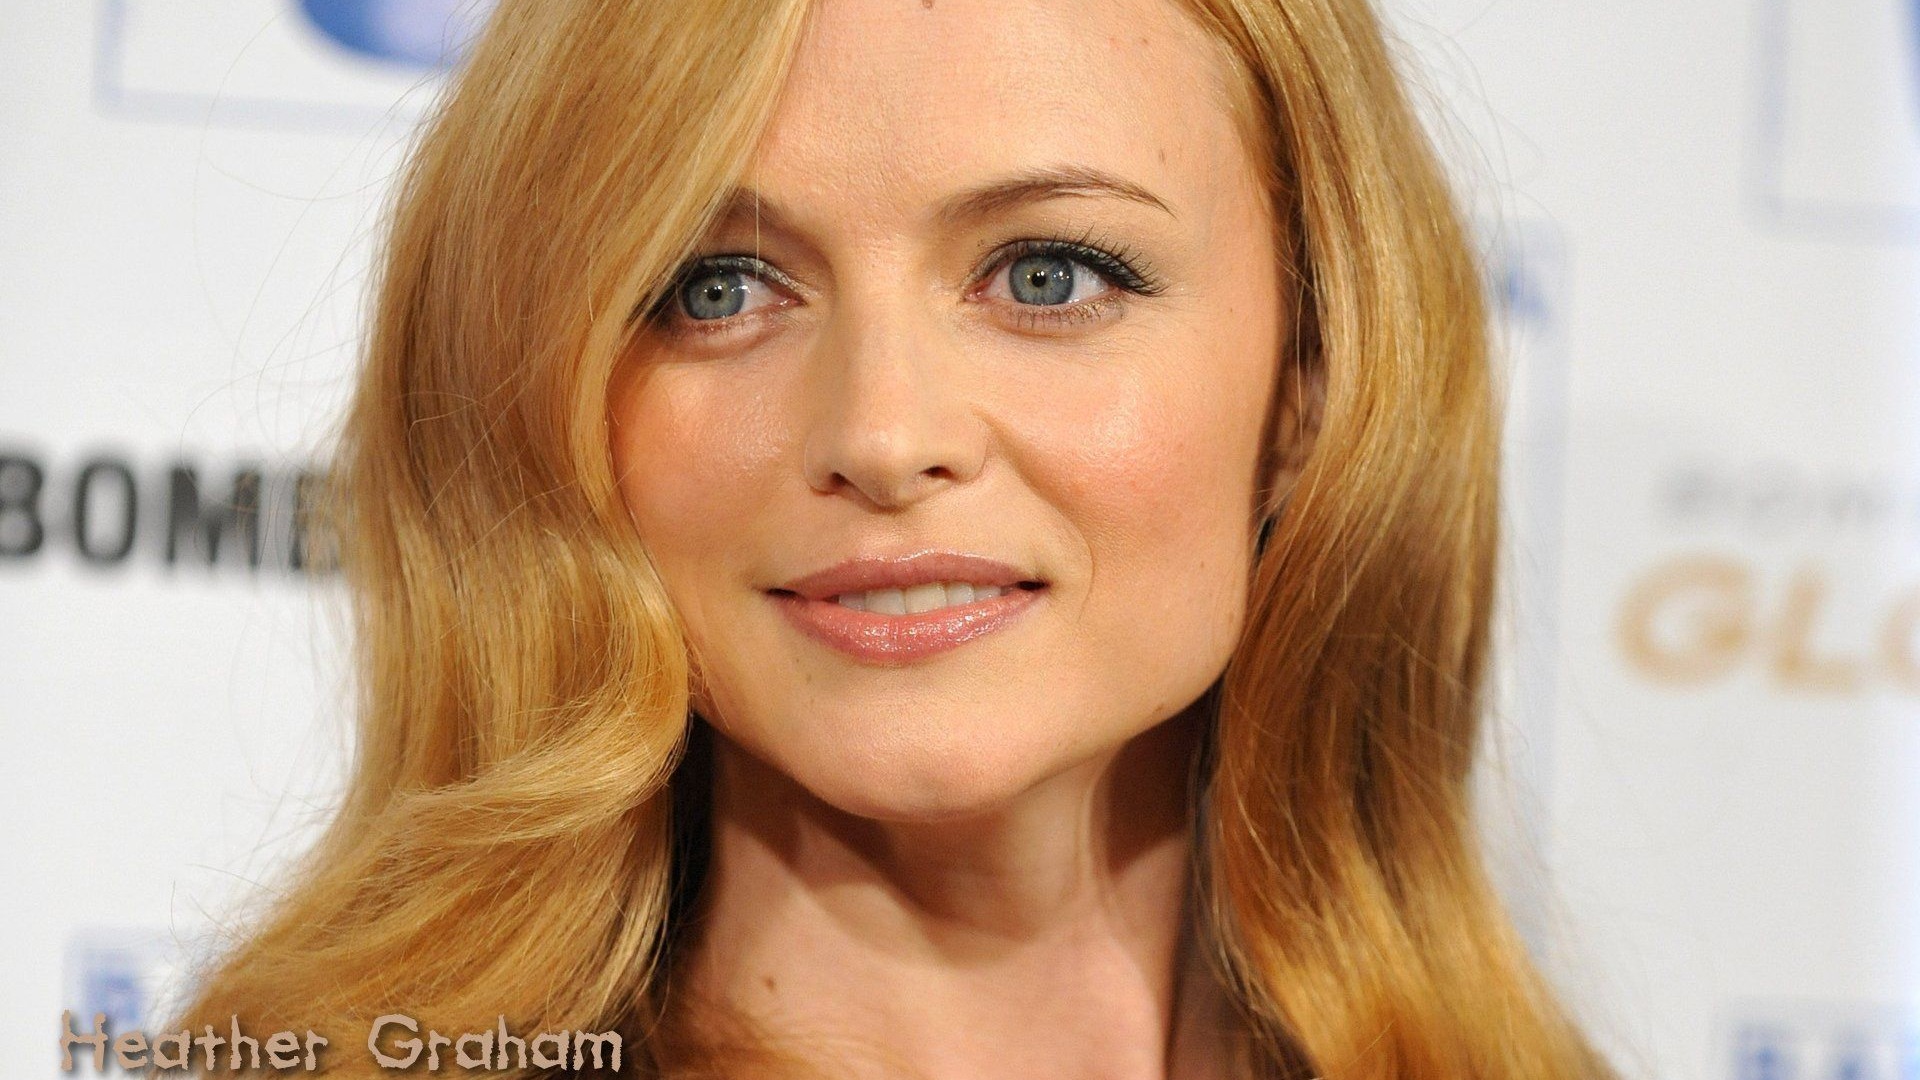 Heather Graham #003 - 1920x1080 Wallpapers Pictures Photos Images